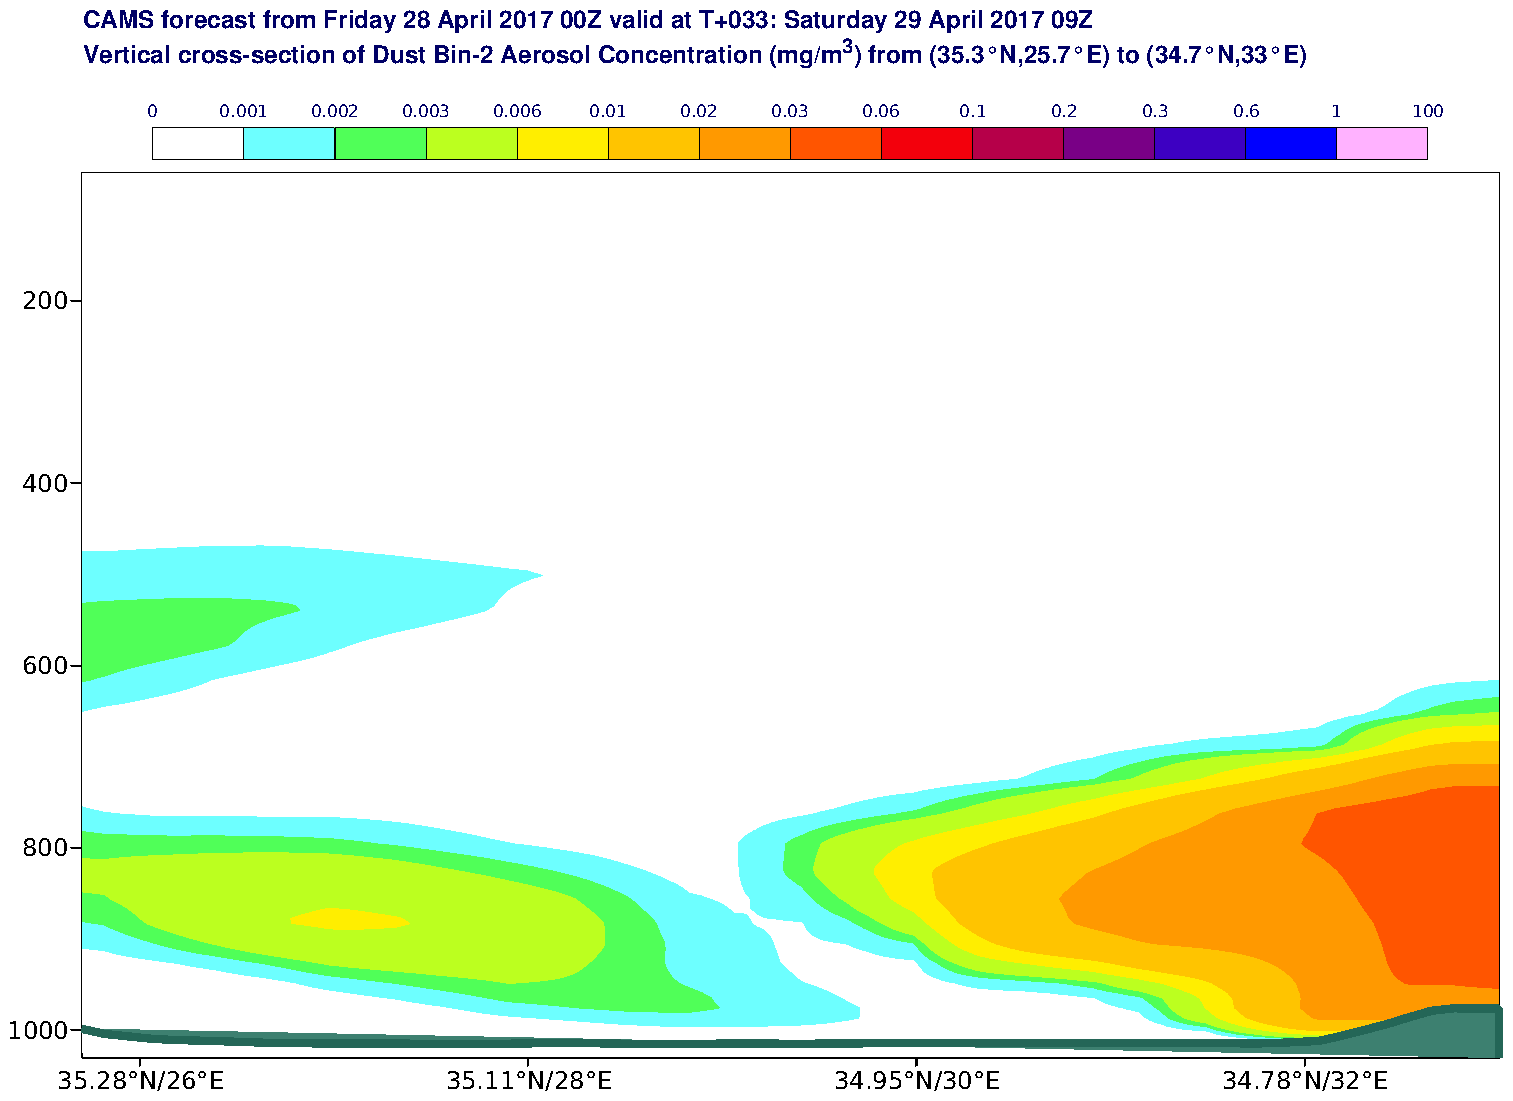 Vertical cross-section of Dust Bin-2 Aerosol Concentration (mg/m3) valid at T33 - 2017-04-29 09:00